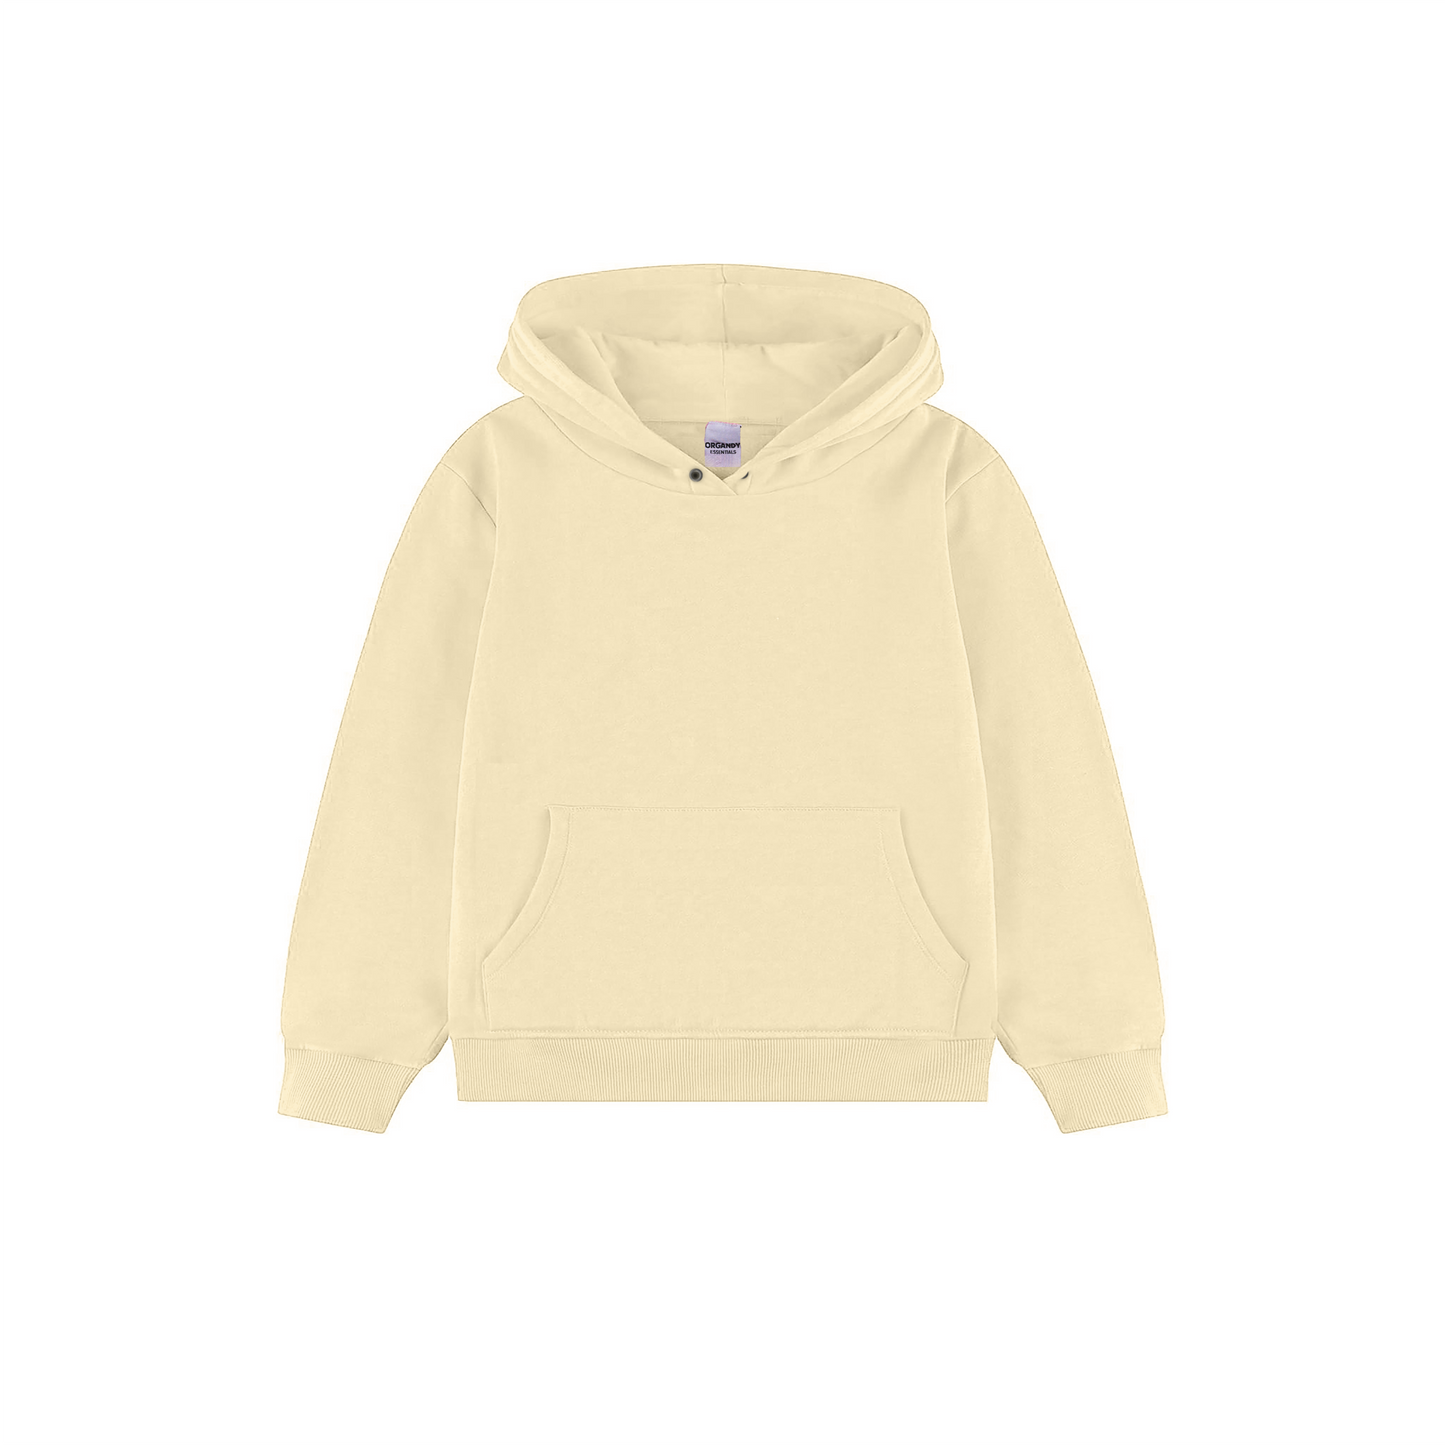 OFF-WHITE LITTLE ONES OVER-SIZED HOODIE